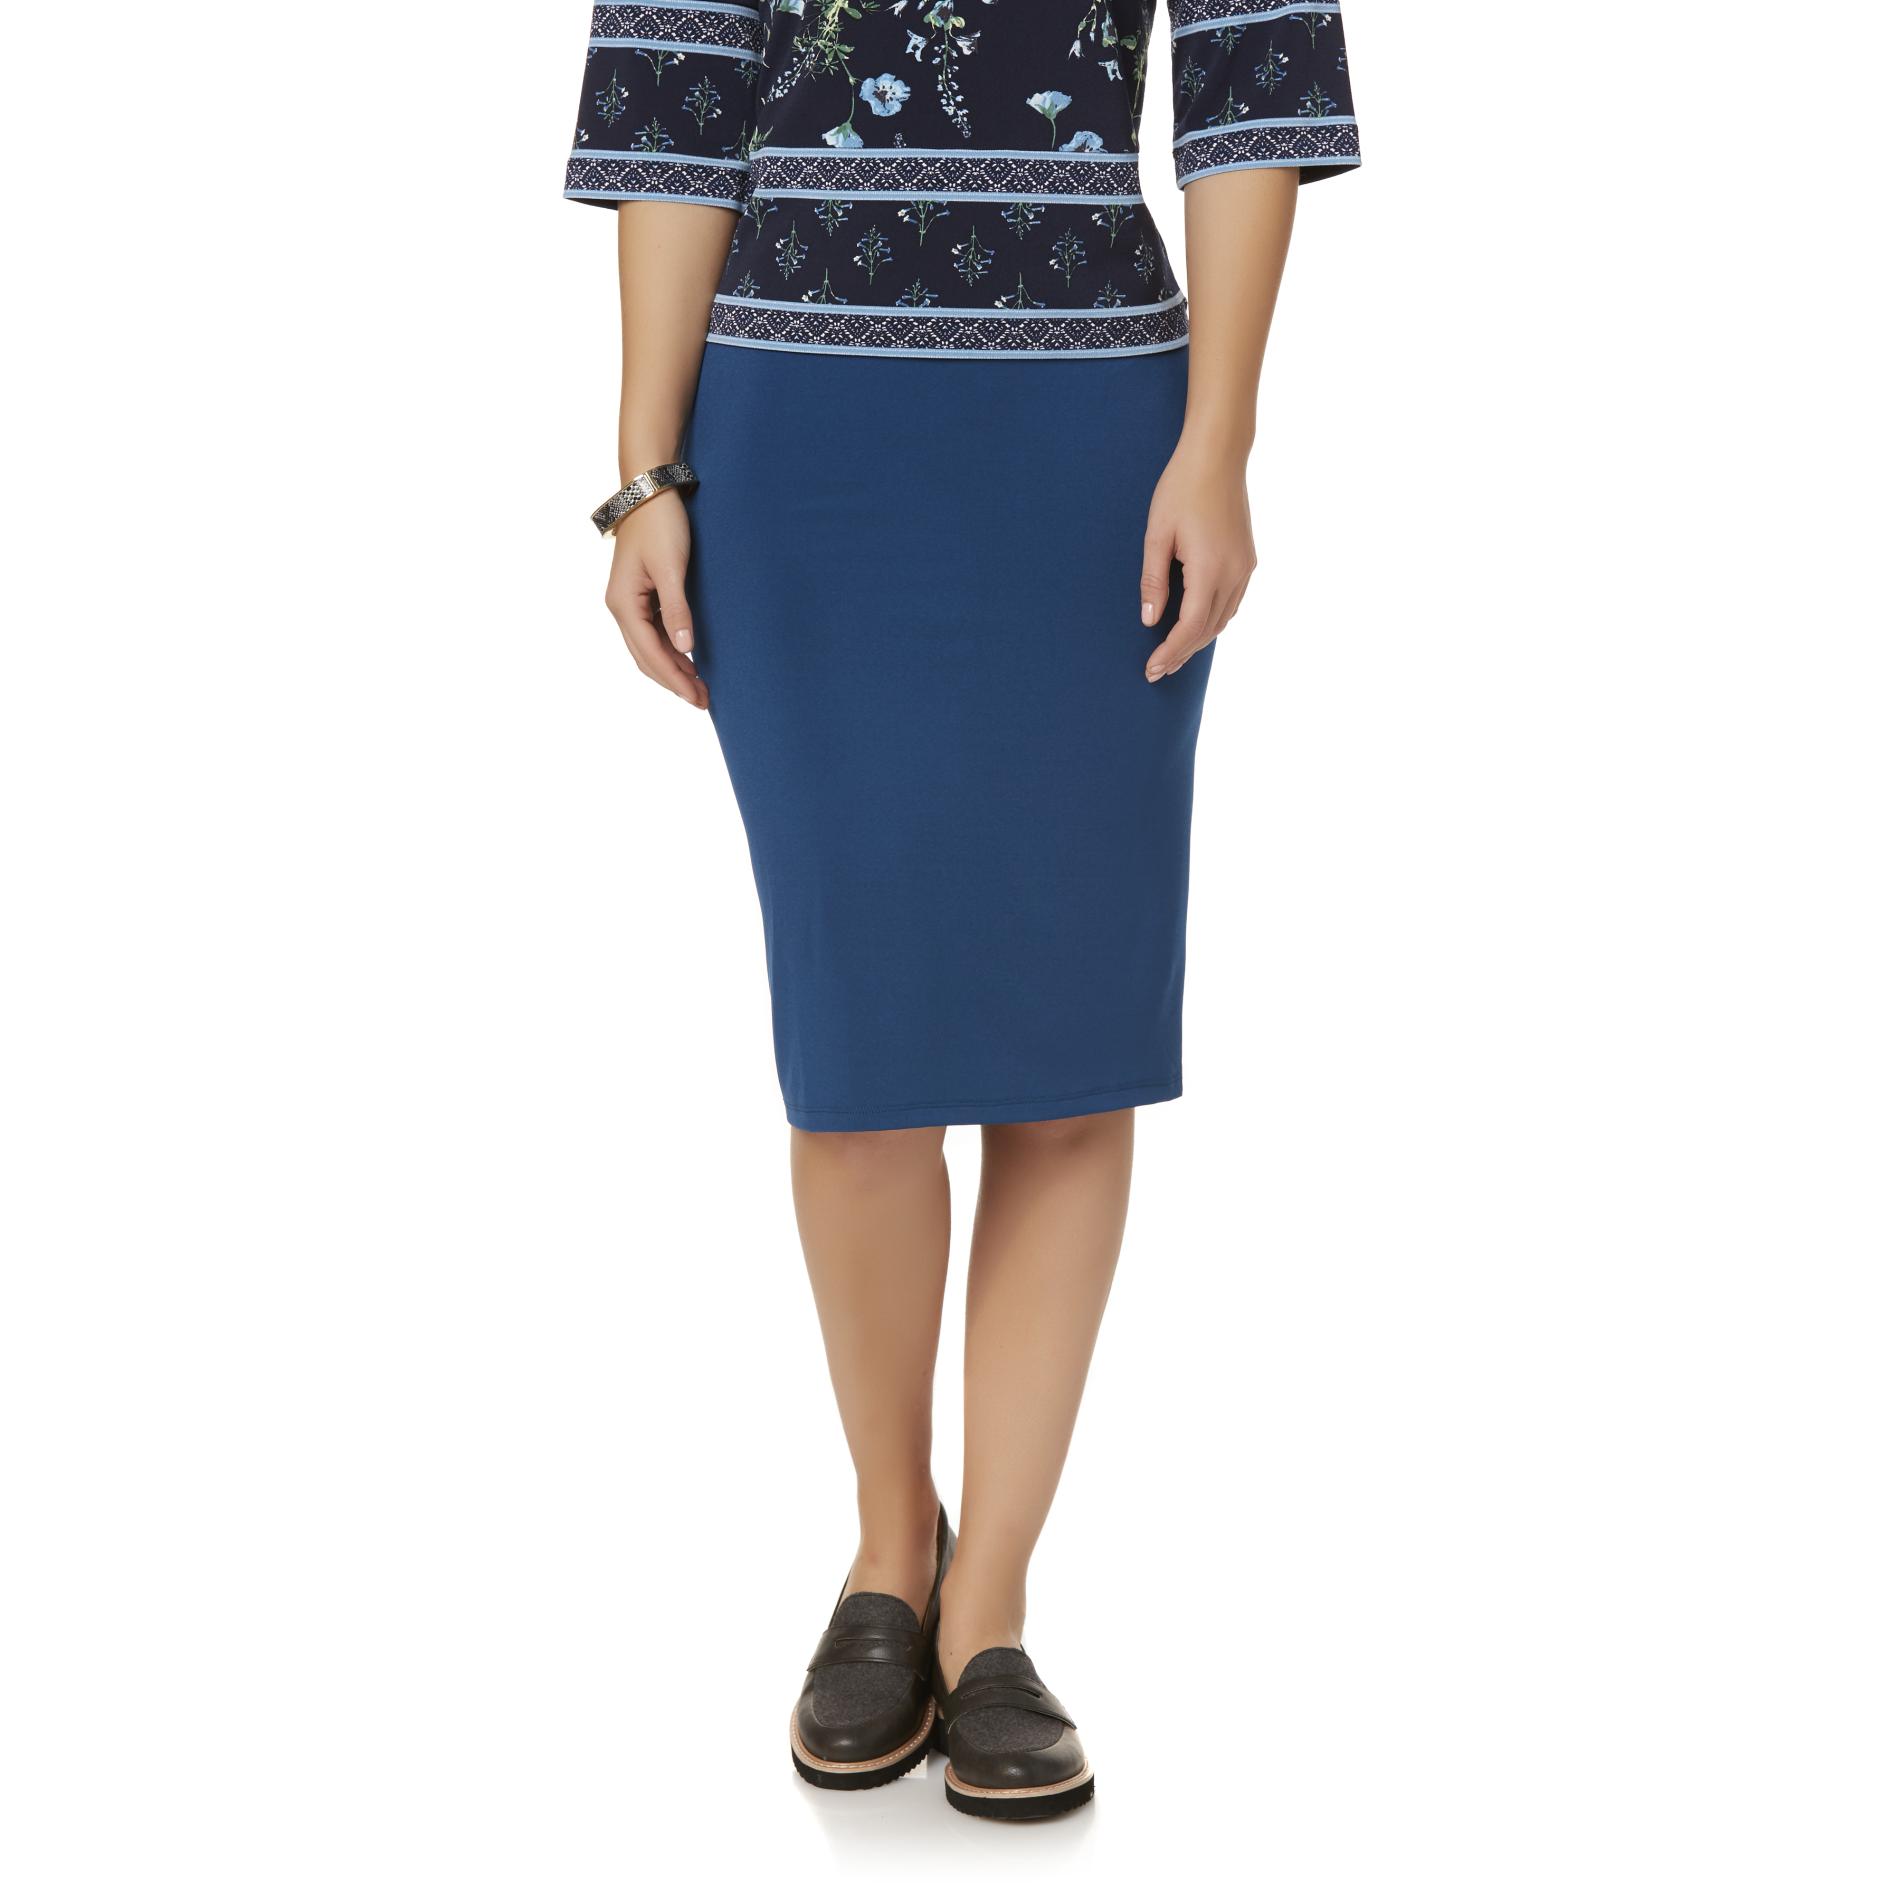 Simply Styled Women's Knit Skirt